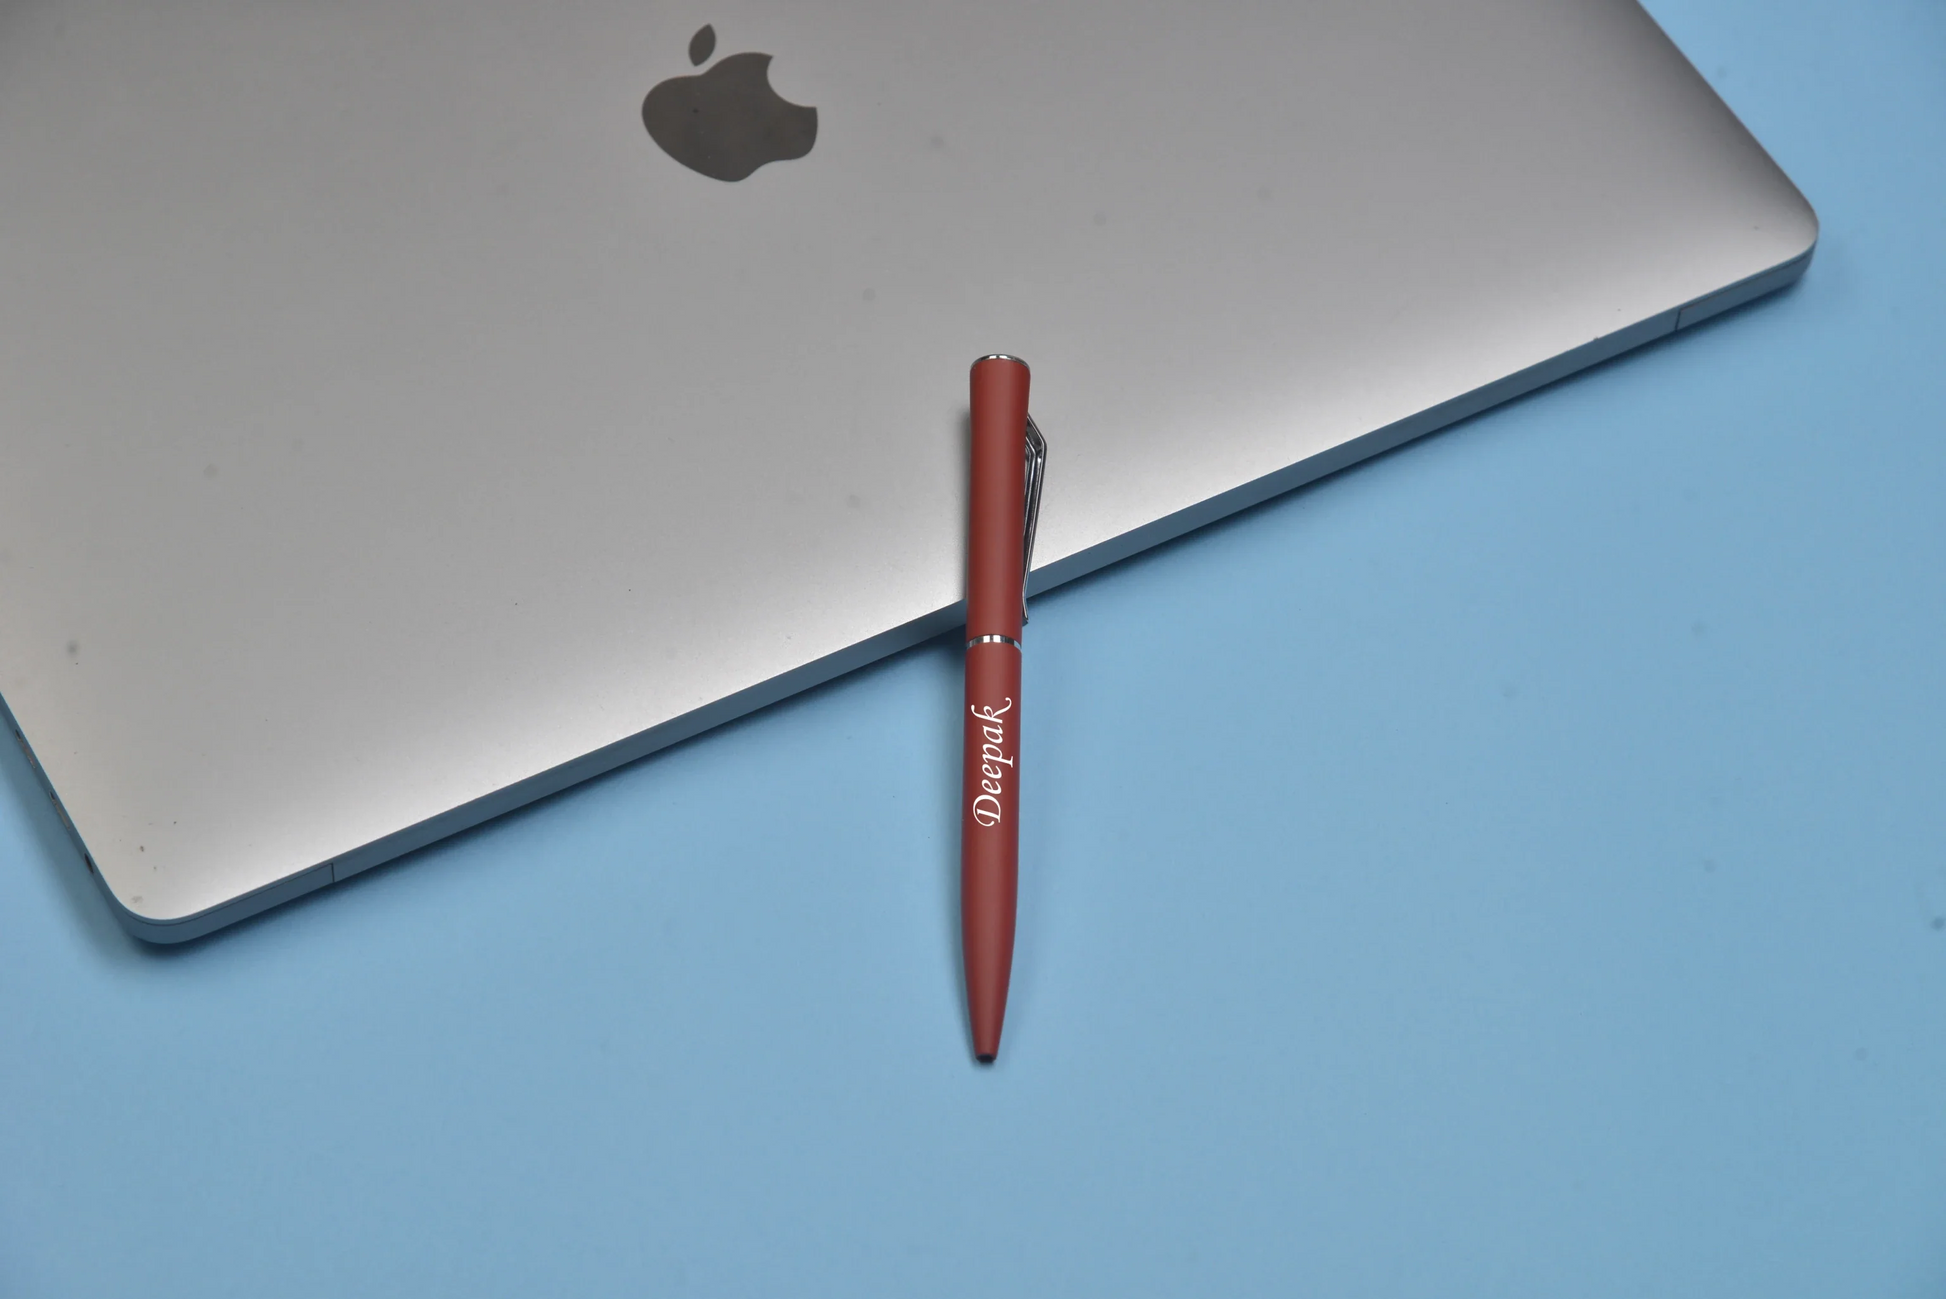 Impress your clients and colleagues with this elegant and sophisticated metal pen.